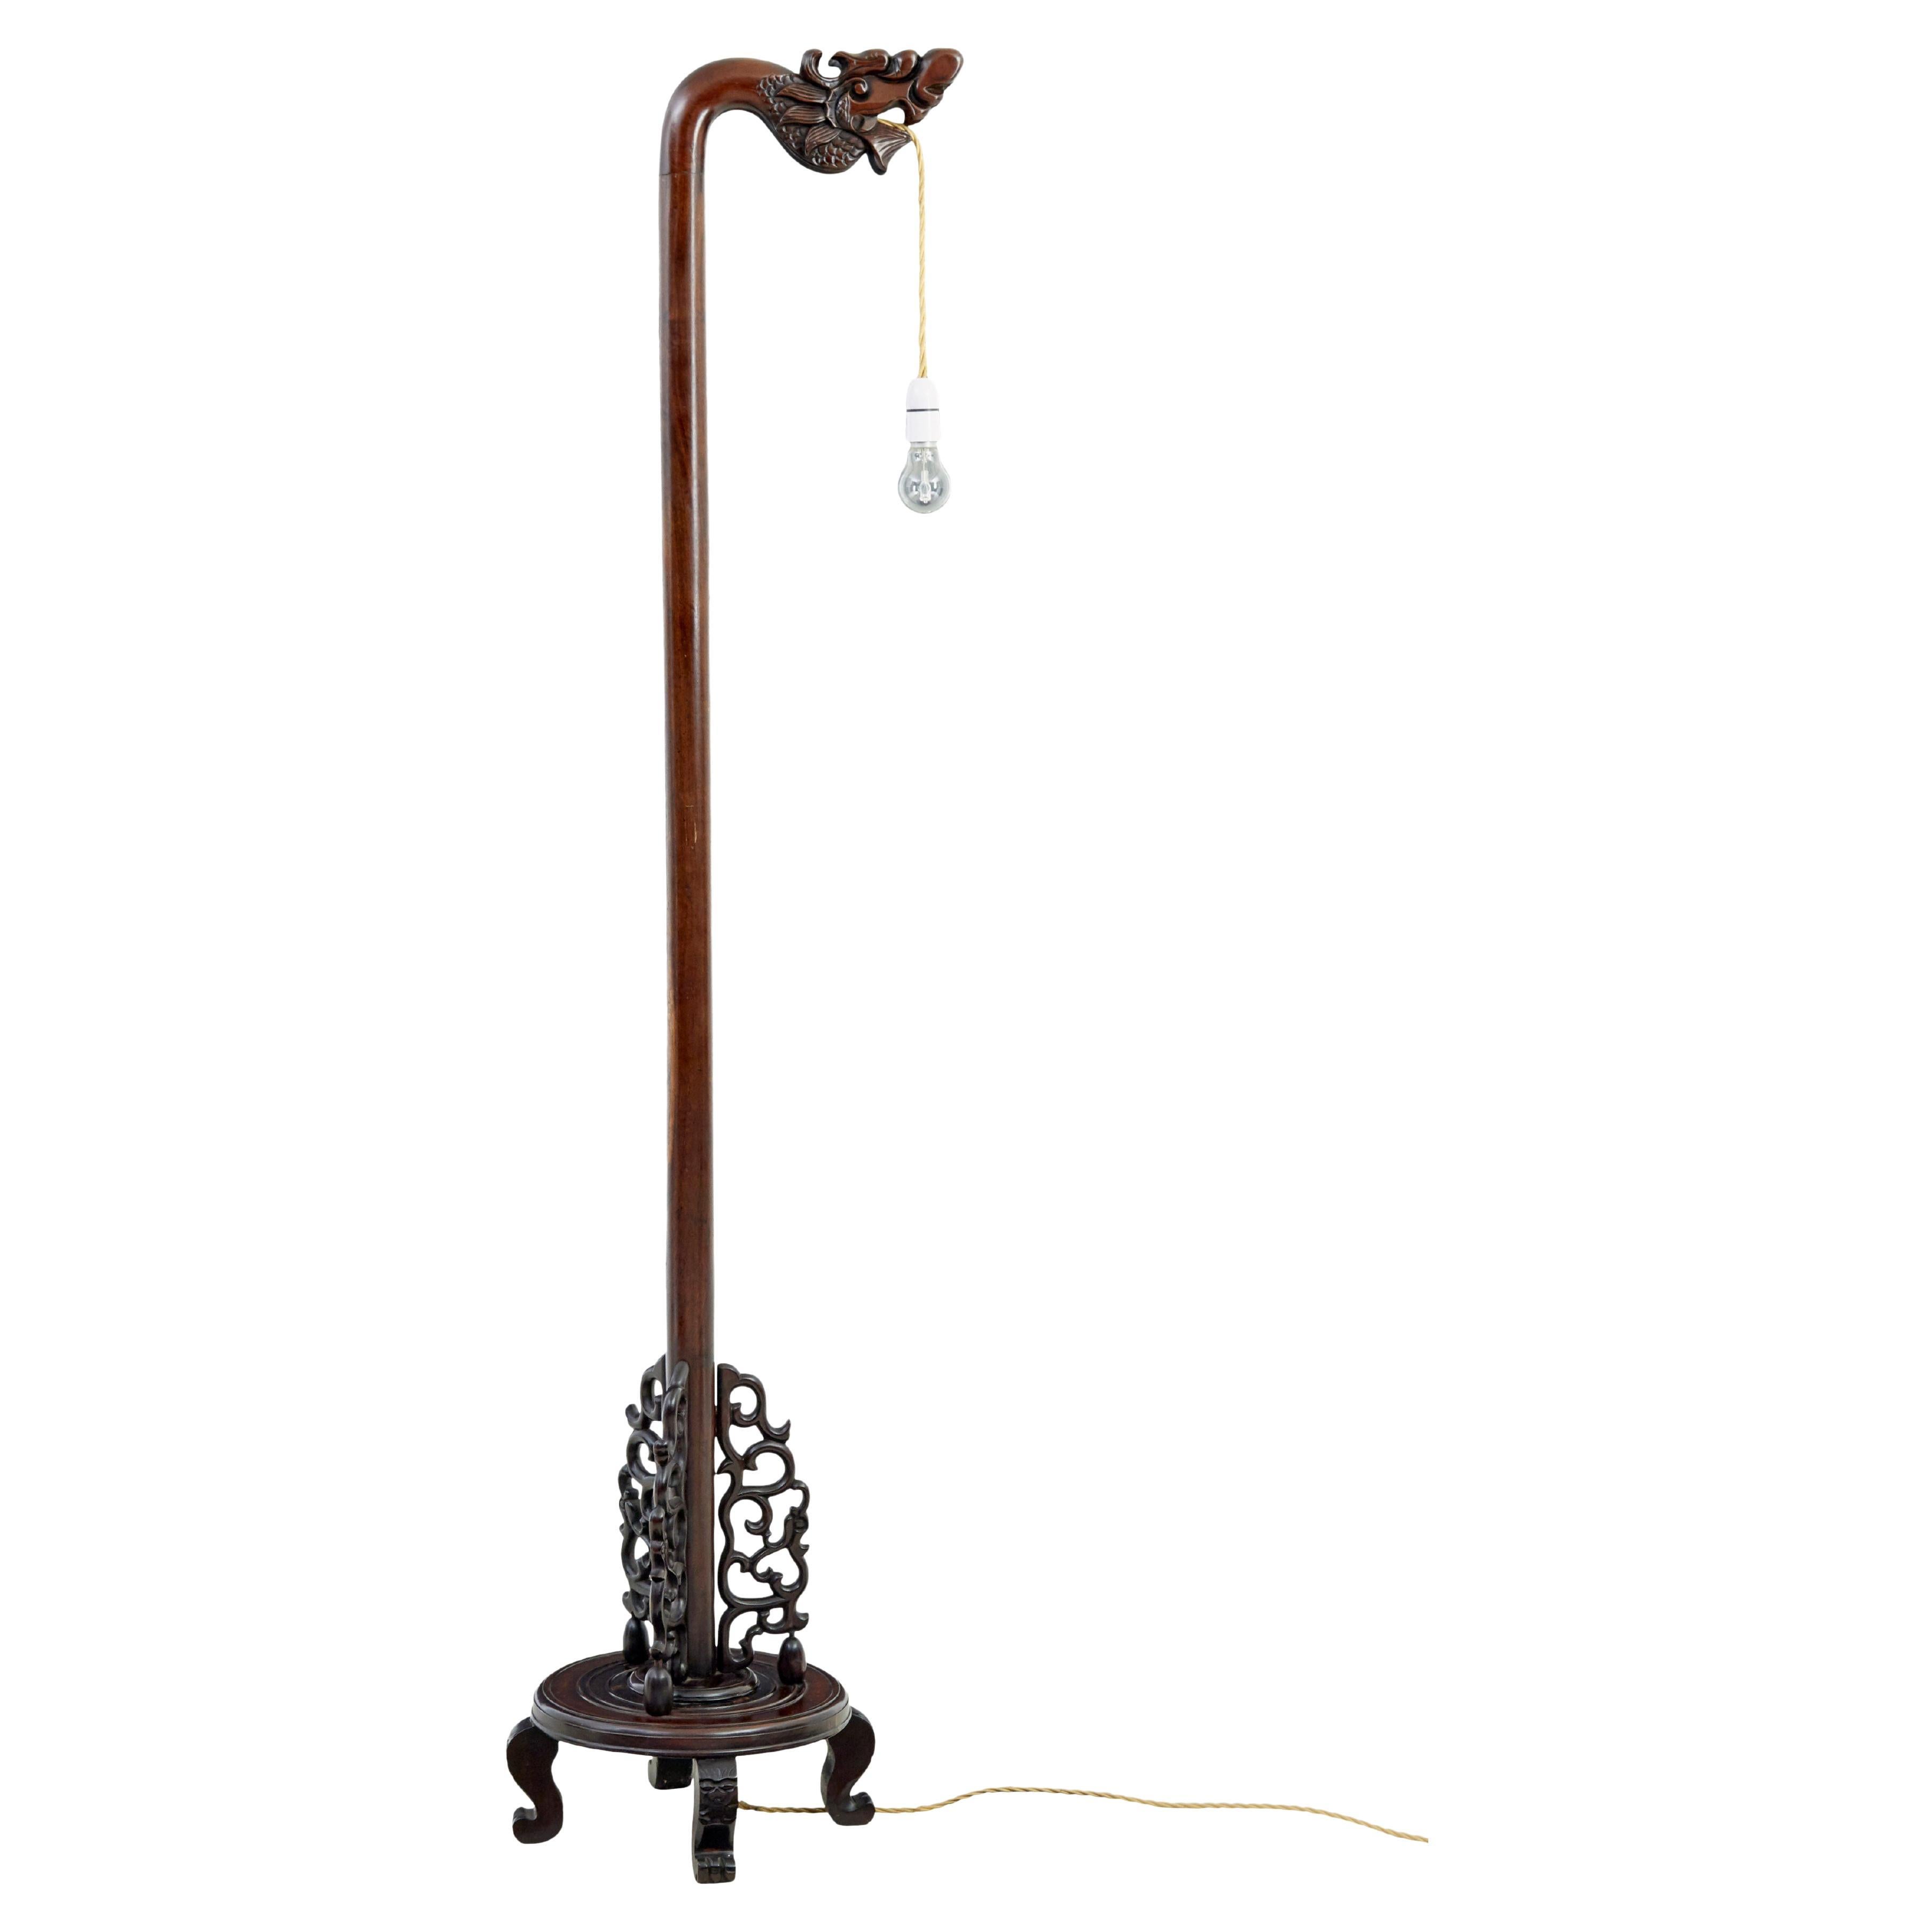 Early 20th century carved Chinese hard wood floor lamp